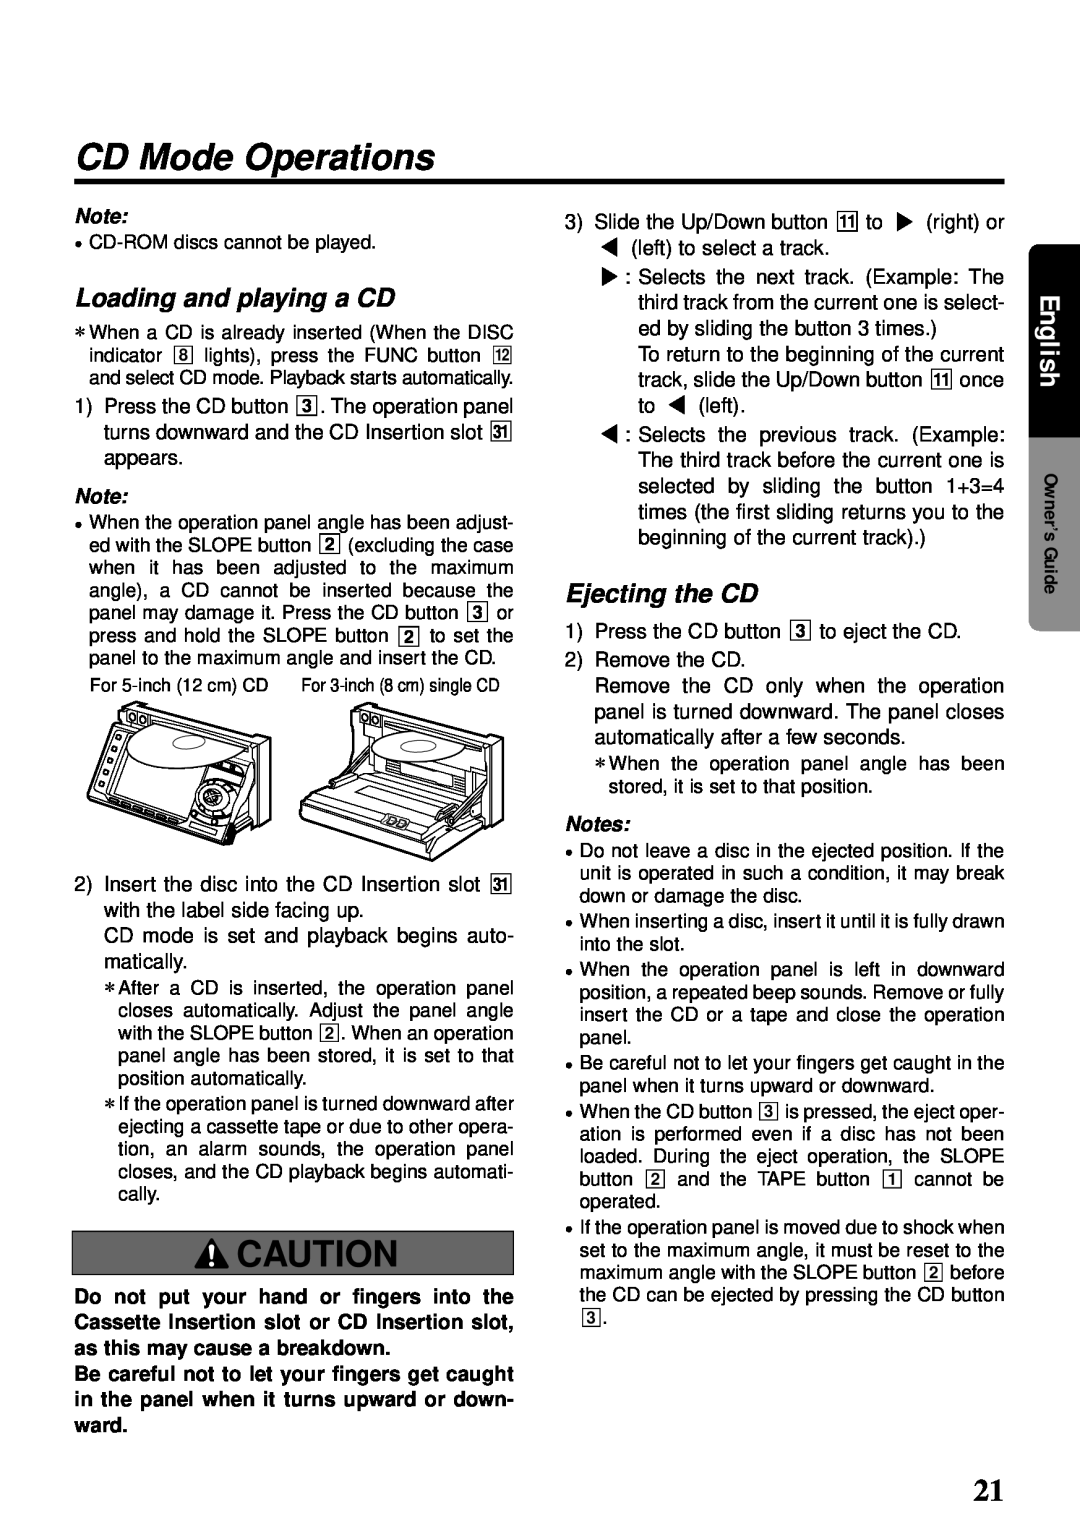 Clarion compact disc manual CD Mode Operations, Loading and playing a CD, Ejecting the CD, English Owner’s Guide 